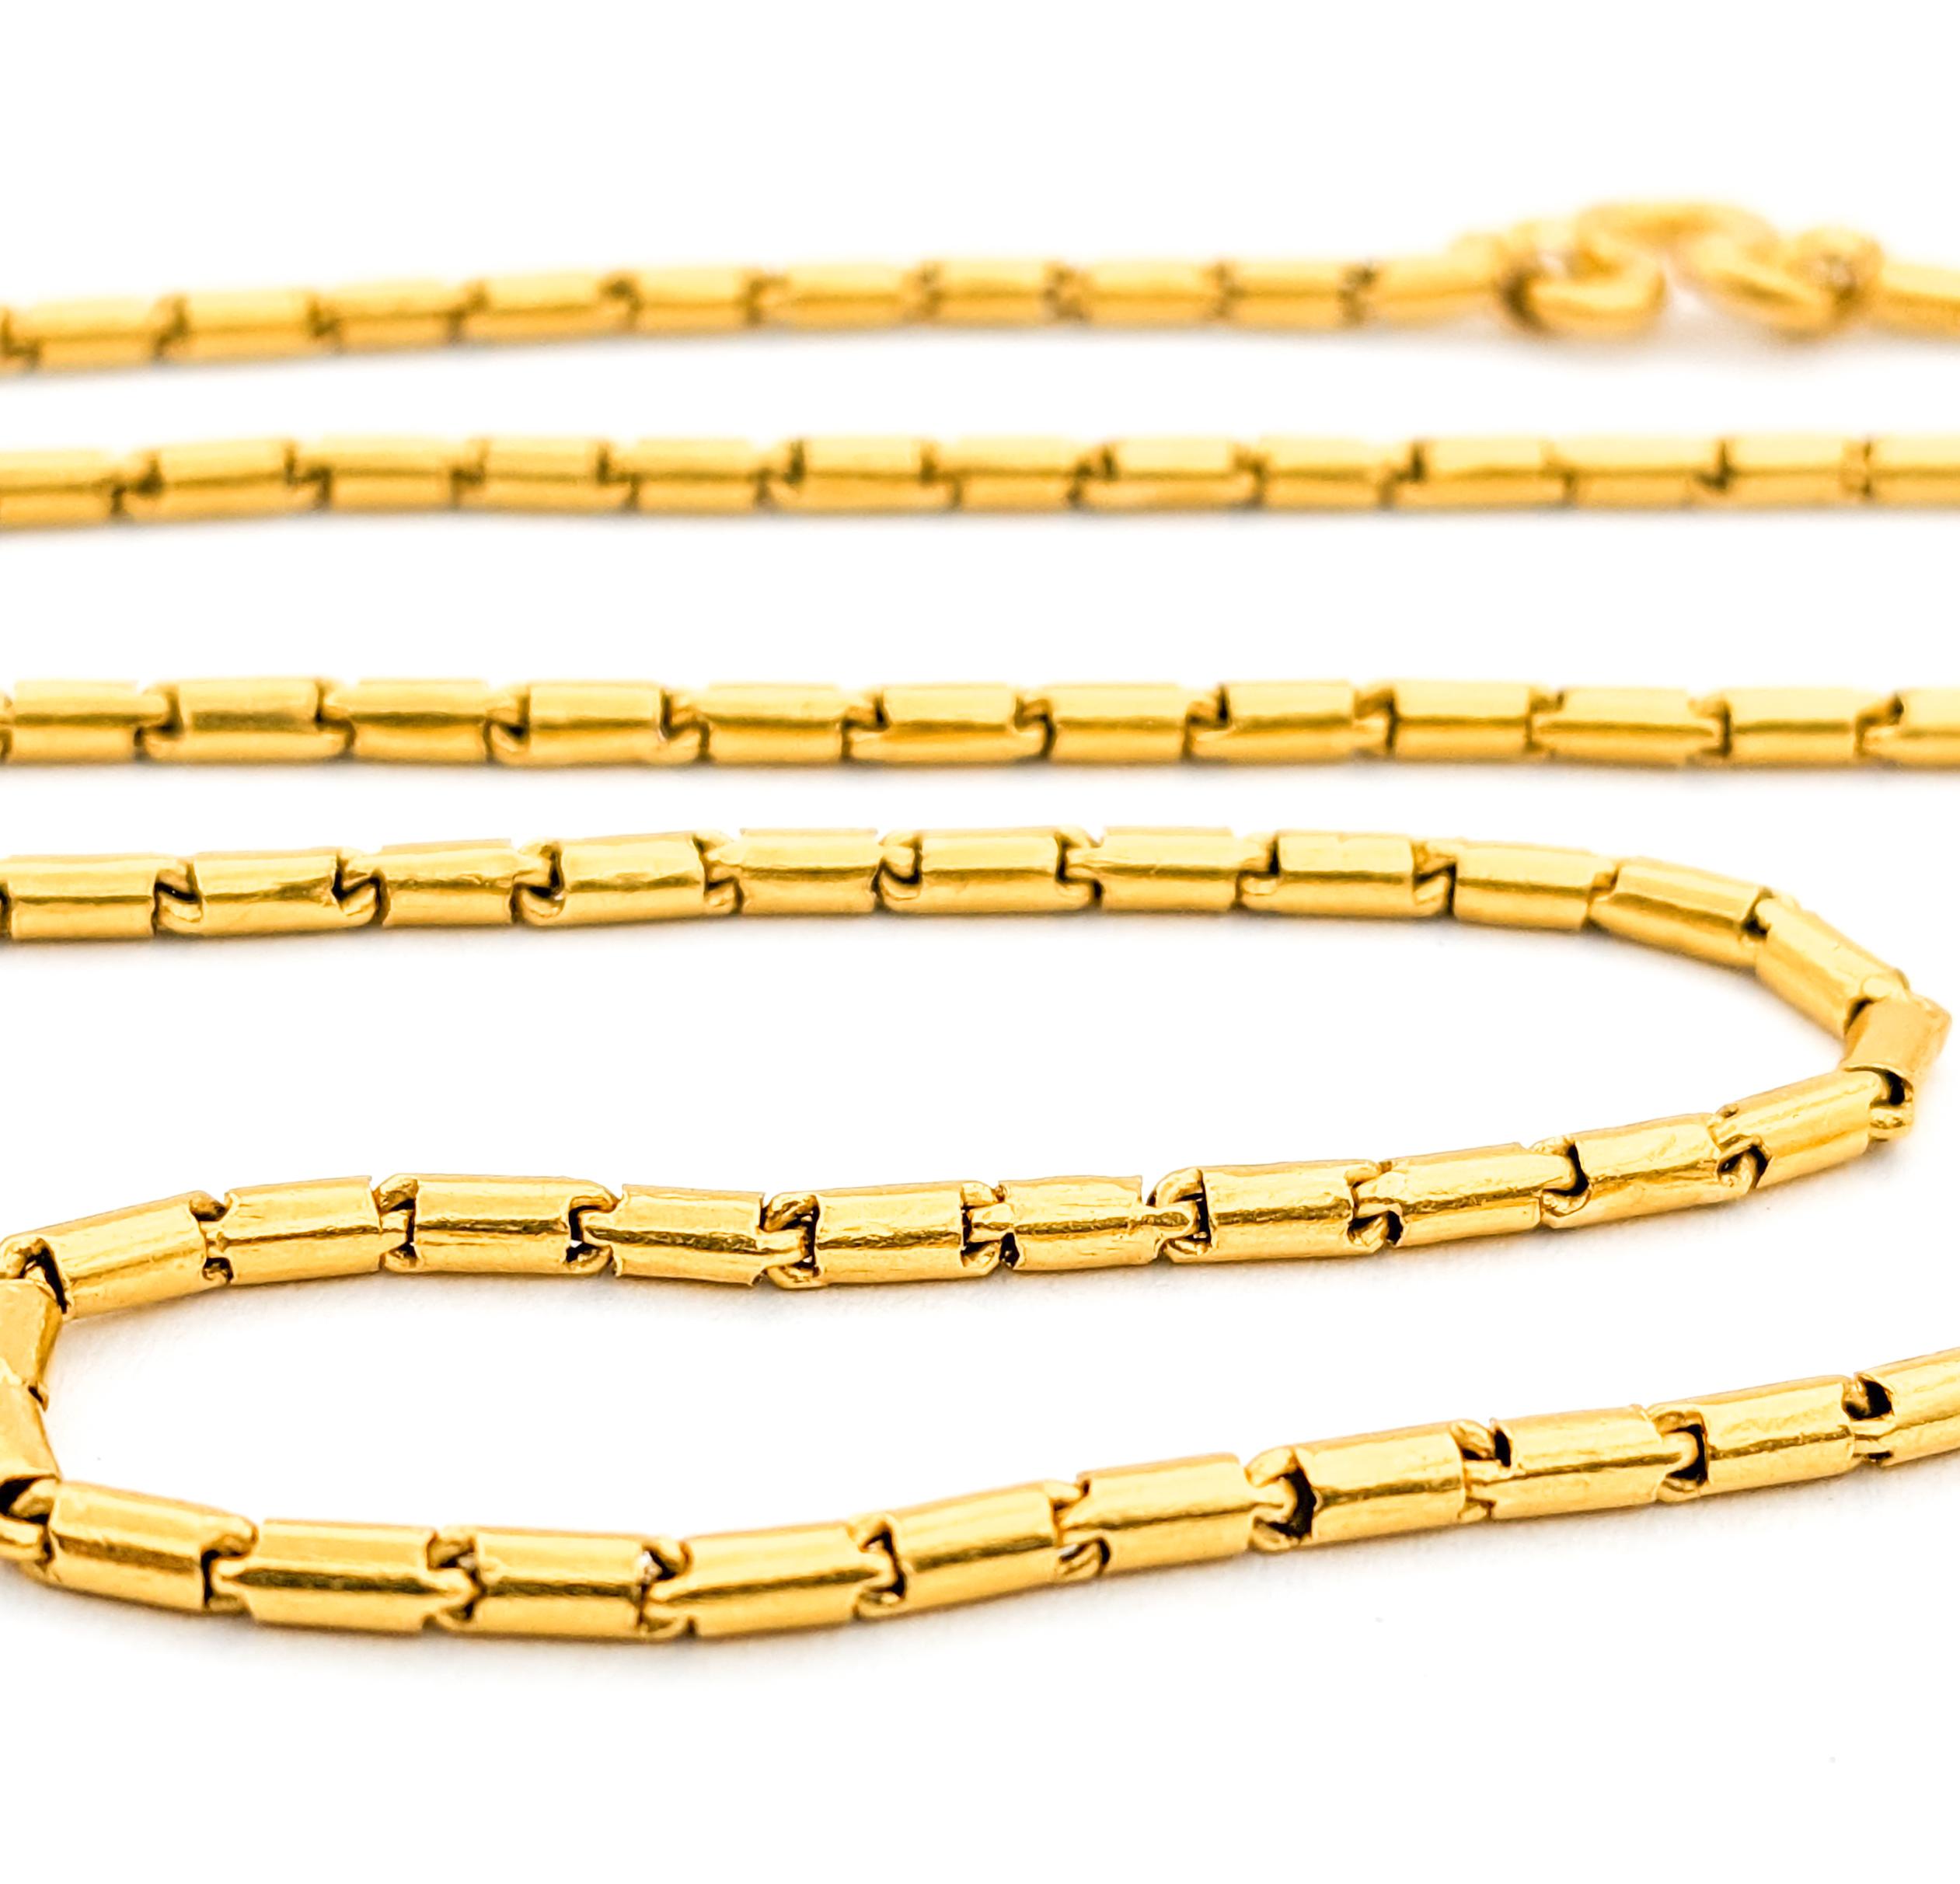 Vintage Barrel Link Chain Necklace in 21k Yellow Gold In Excellent Condition For Sale In Bloomington, MN